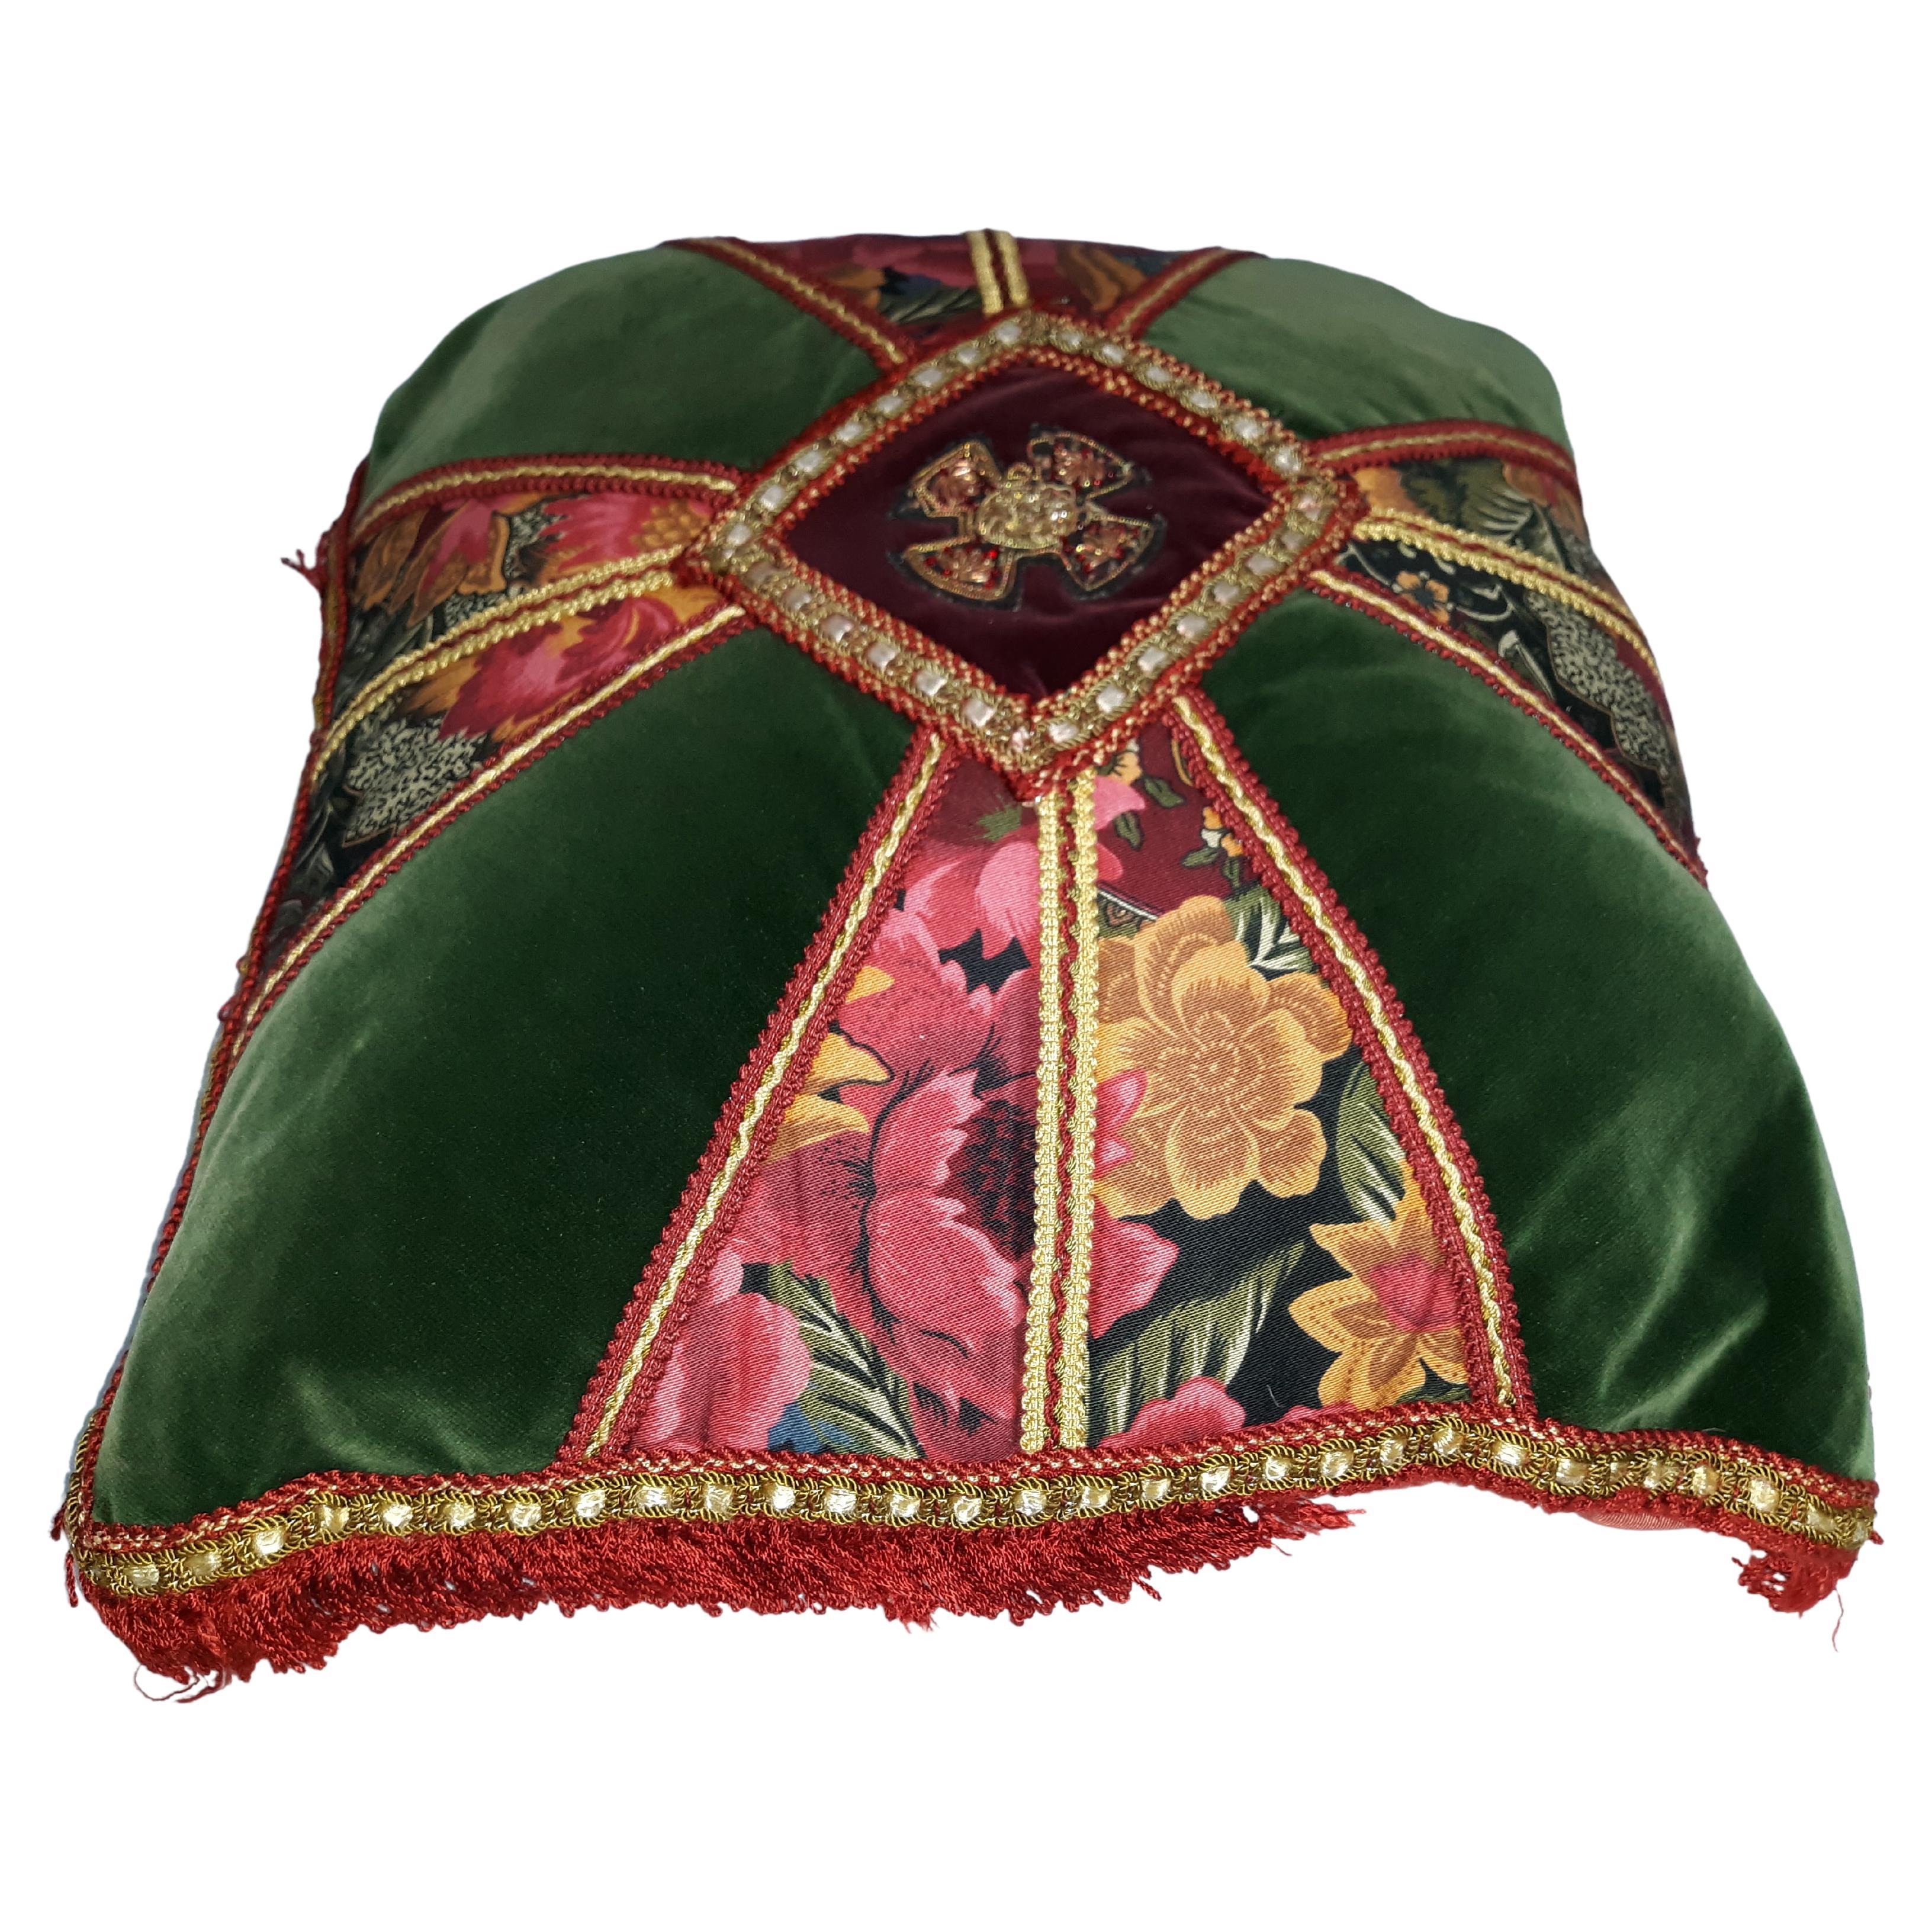 Luois XVI Antique Embroidered Cushions Est. 1930 Green & Red Velvet For Sale